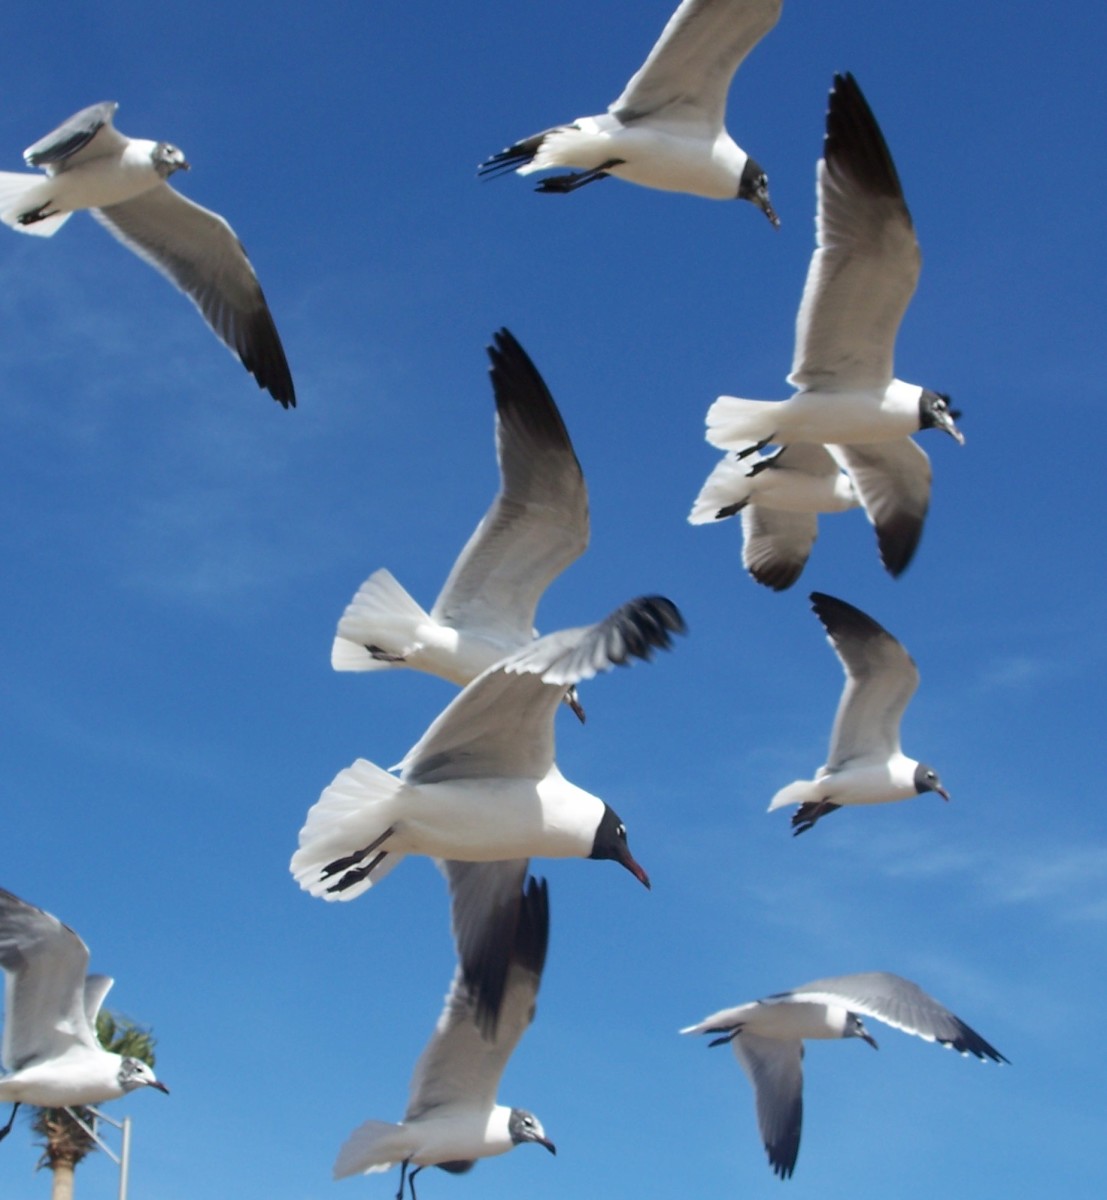 Gulls flying overhead try to grab our sandwiches from our hands while we eat!